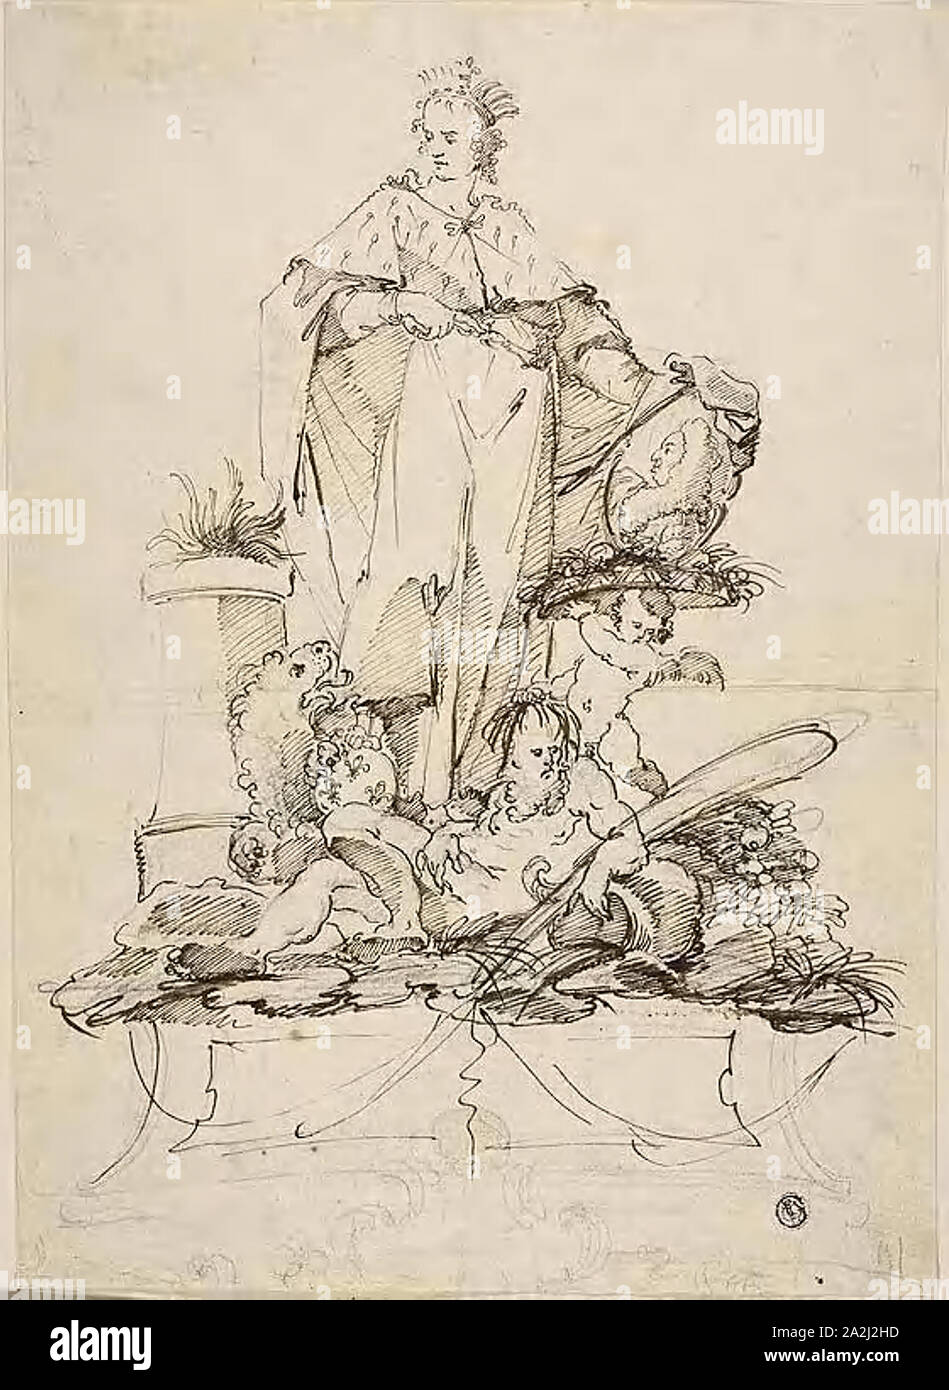 Allegory in Honor of Grand Duke Gian-Gastone de’Medici, n.d., Possibly Pietro Antonio Novelli (Italian, 1729-1804), or Francesco Conti (Italian, 1681-1760), or Guillaume Coustou, I (French, 1677-1746), or Vincenzo Franceschini (Italian, 1812-1885), Italy, Pen and brown ink, with traces of brush and brown ink, over black chalk on ivory laid paper, 356 × 261 mm Stock Photo